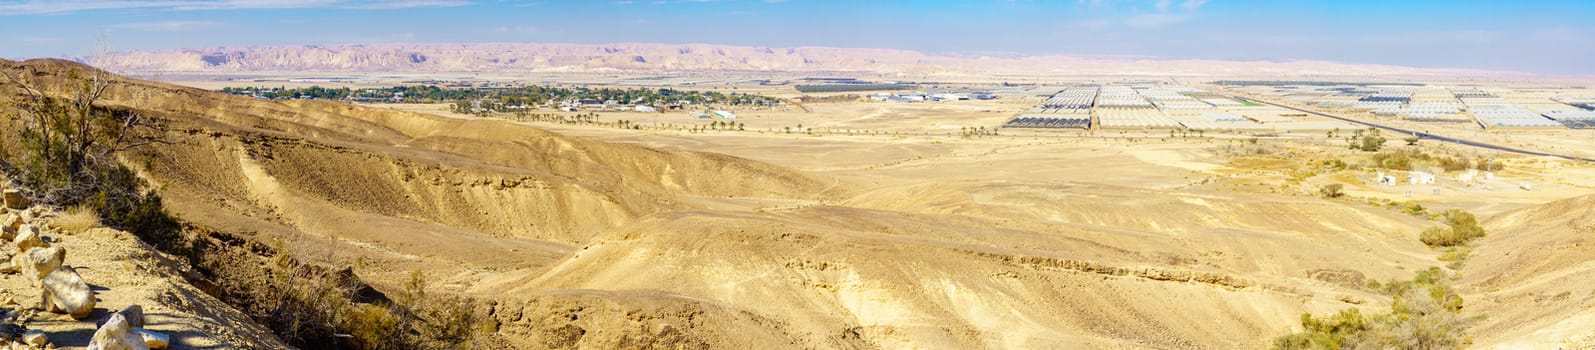 Panoramic view of Paran and the Arava desert landscape from Paran lookout, Southern Israel